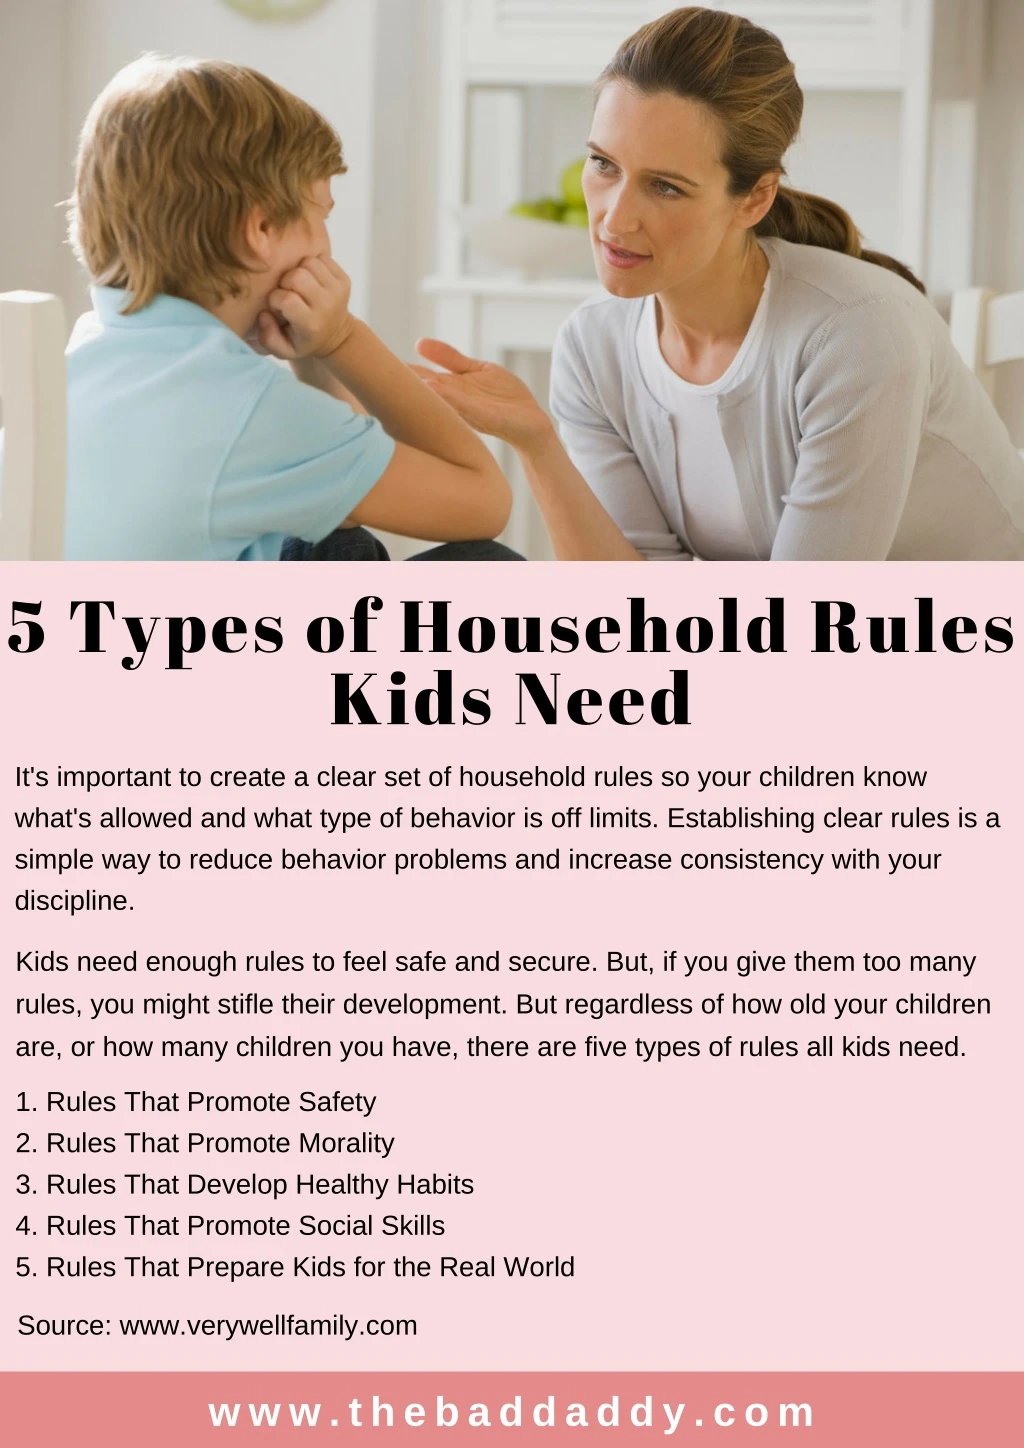 5 types of household rules kids need